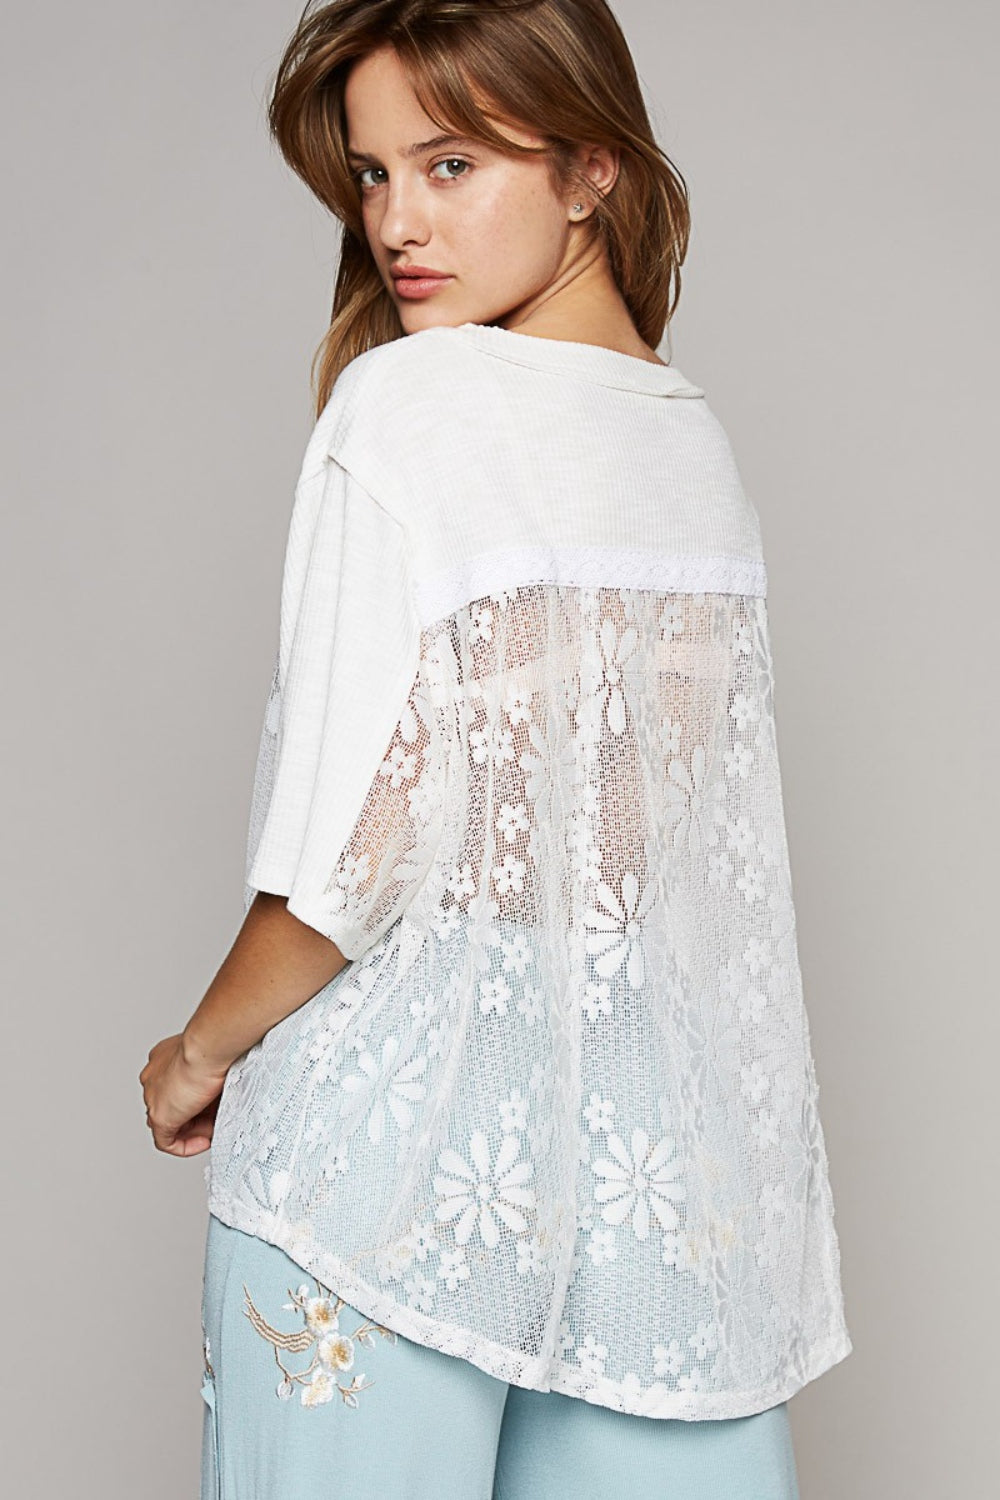 Round Neck Short Sleeve Lace Top